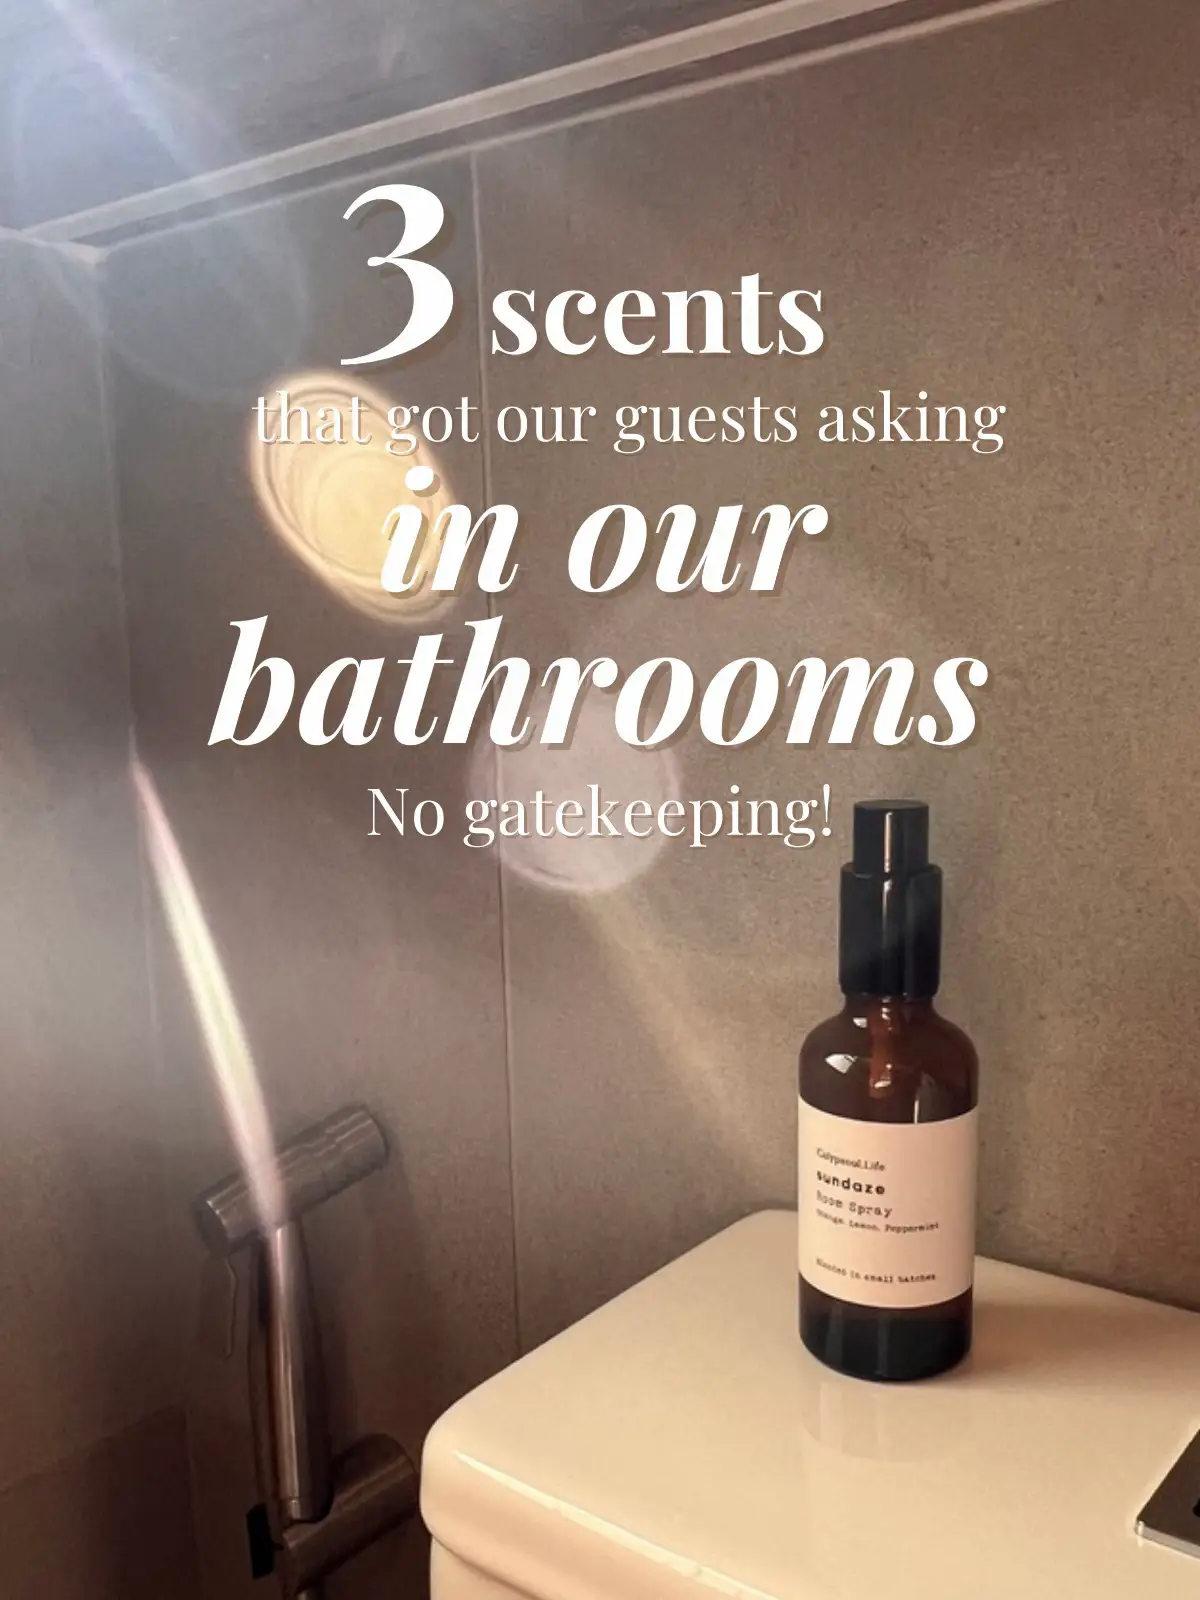 🚽No gatekeeping: 3 bathroom scents that our guests's images(0)